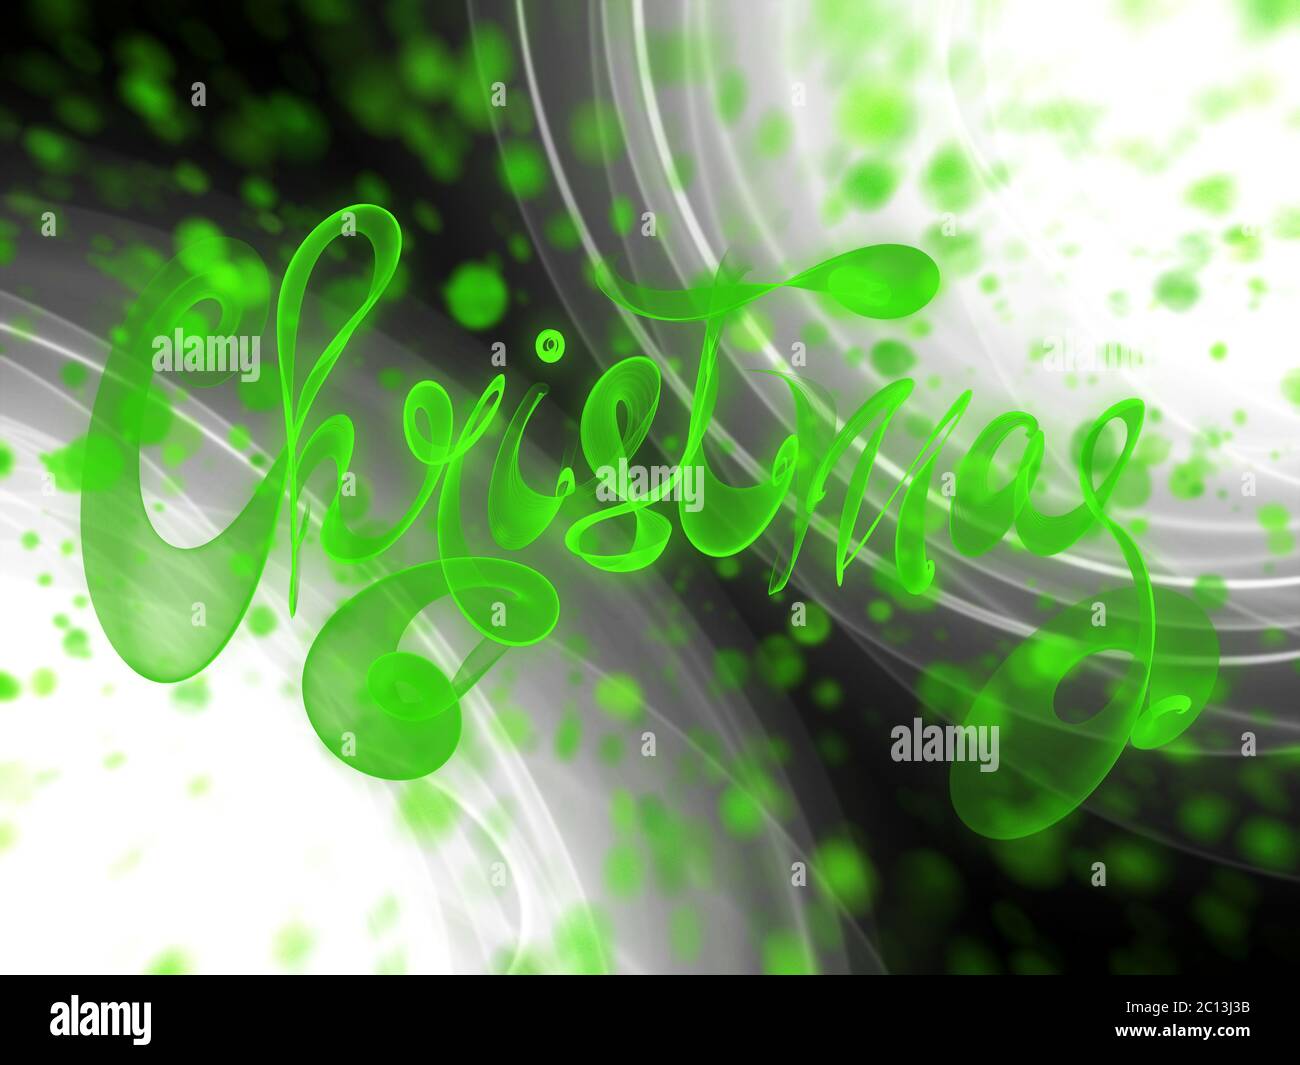 Christmas word lettering written with green fire flame or smoke on blurred bokeh background Stock Photo